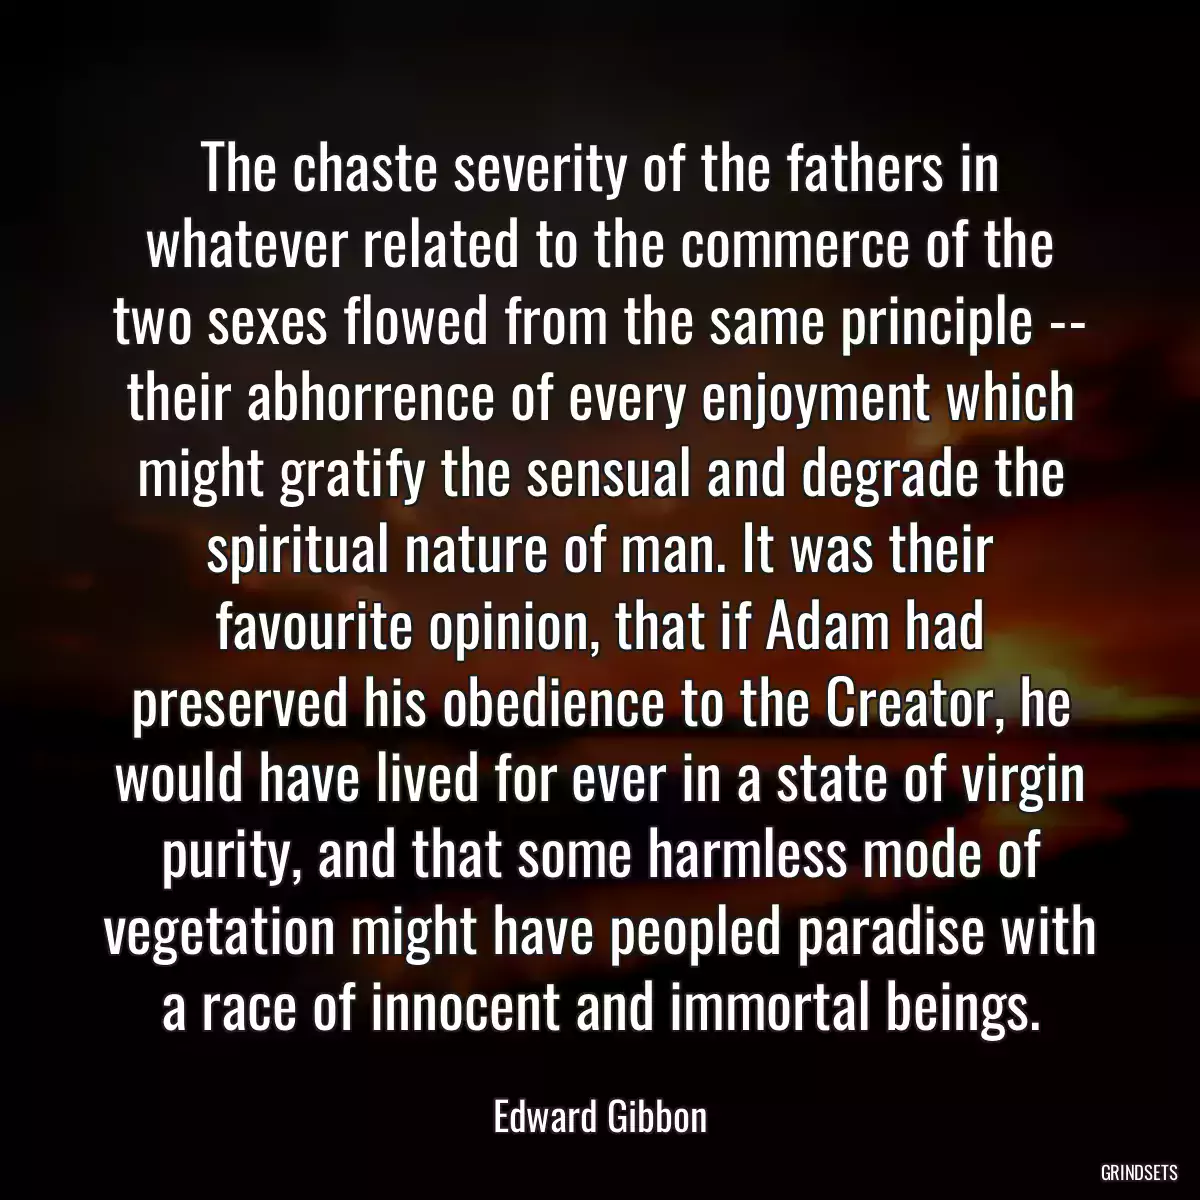 The chaste severity of the fathers in whatever related to the commerce of the two sexes flowed from the same principle -- their abhorrence of every enjoyment which might gratify the sensual and degrade the spiritual nature of man. It was their favourite opinion, that if Adam had preserved his obedience to the Creator, he would have lived for ever in a state of virgin purity, and that some harmless mode of vegetation might have peopled paradise with a race of innocent and immortal beings.